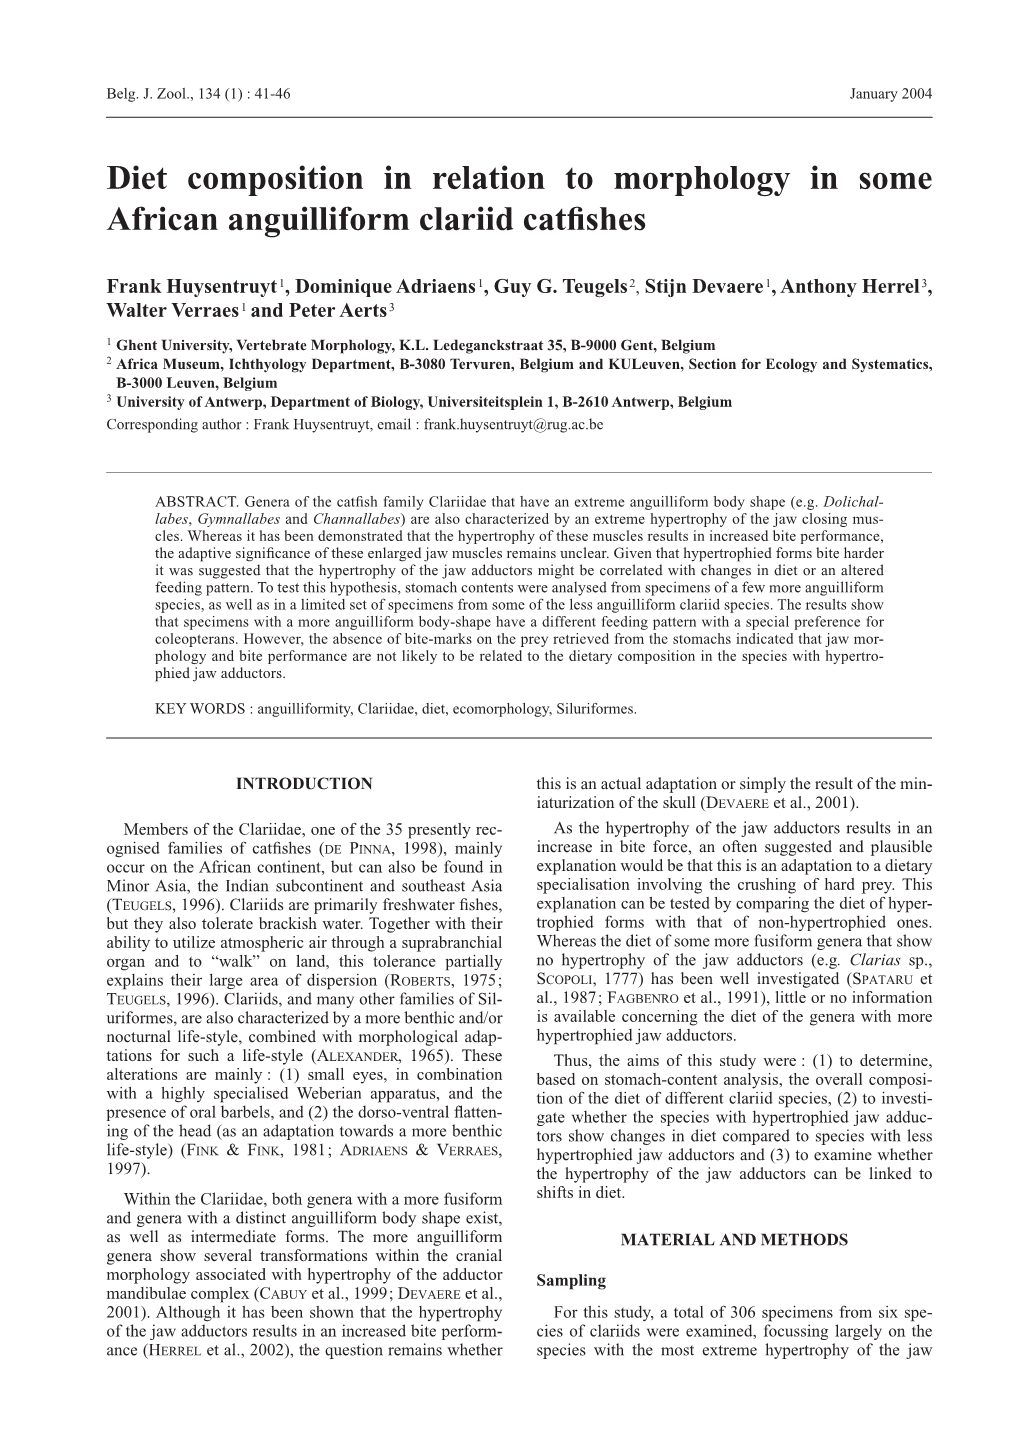 Diet Composition in Relation to Morphology in Some African Anguilliform Clariid Catﬁshes